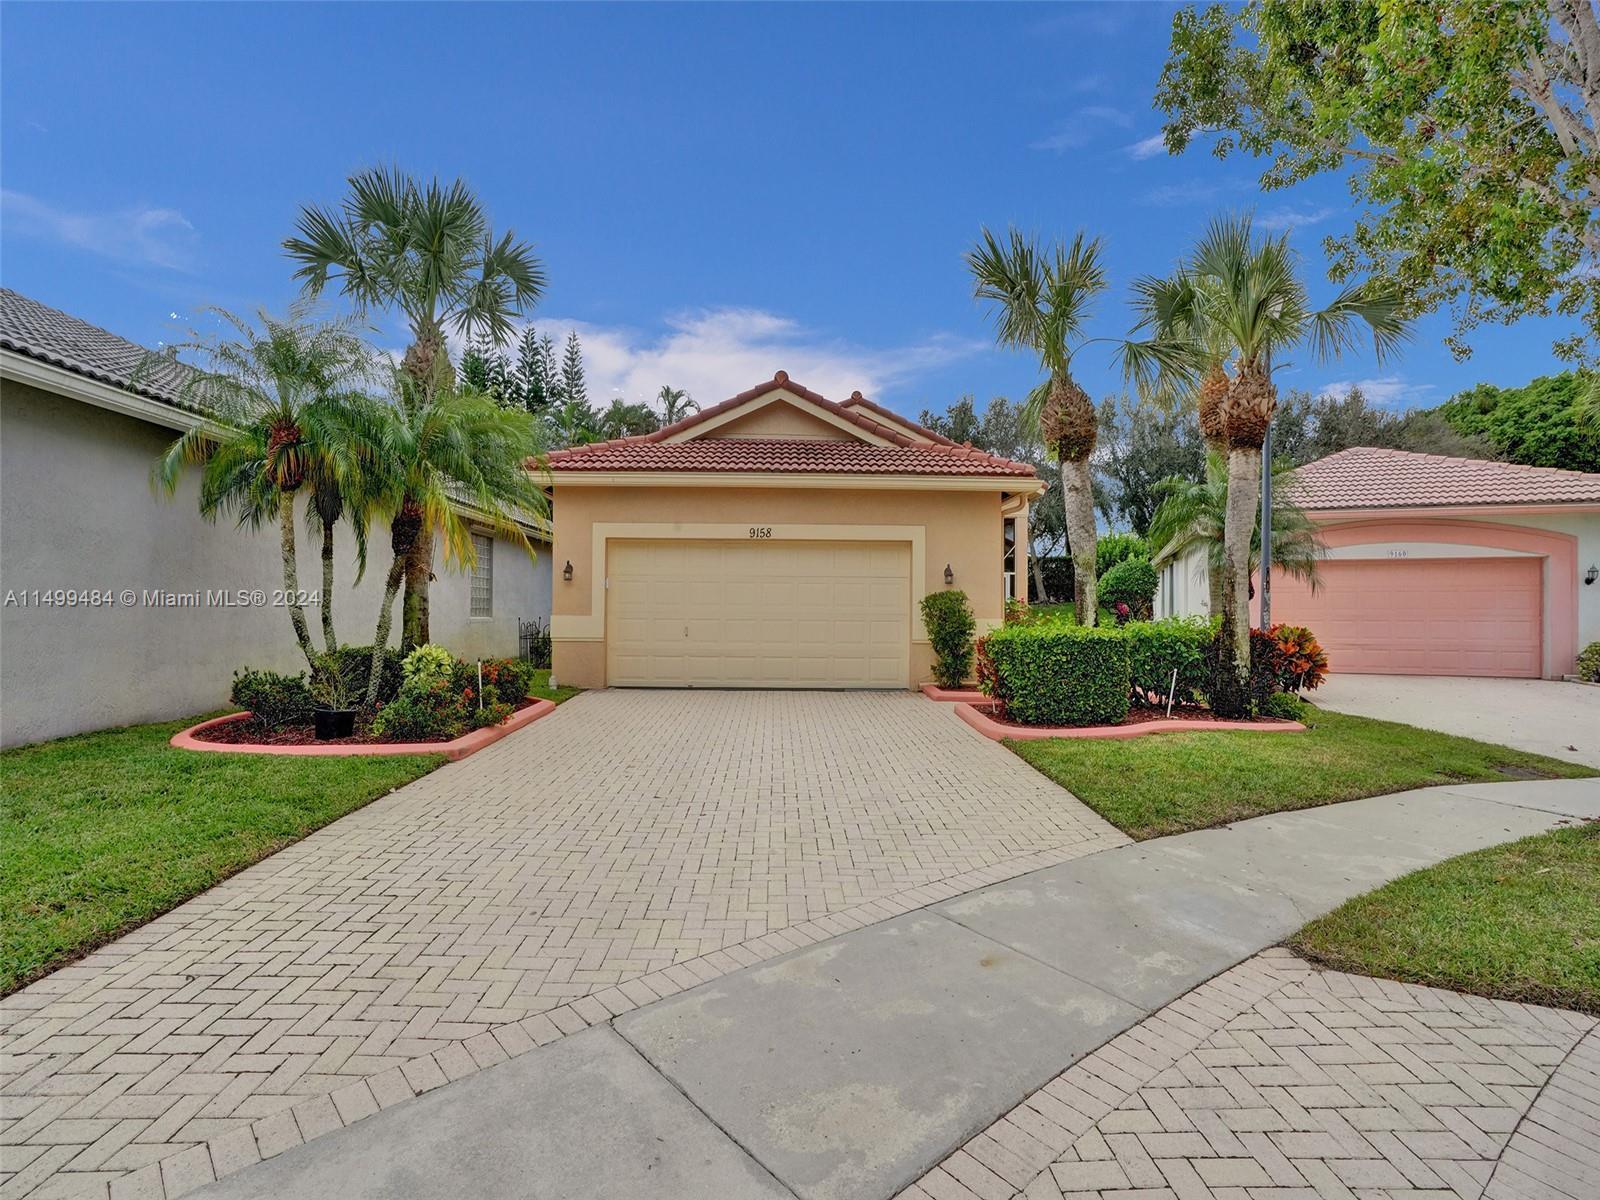 This charming one-story home is nestled in Royal Palm Beach, FL. Boasting three bedrooms and two bat